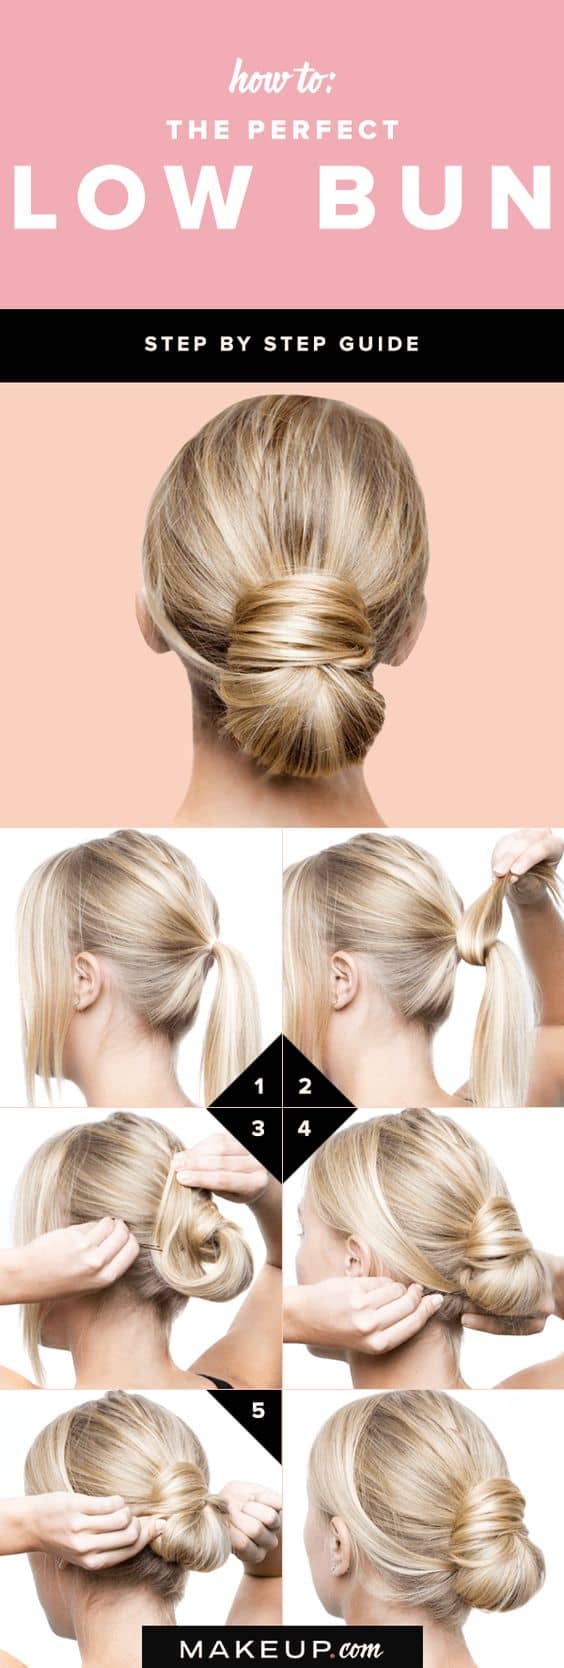 27 Most Beautiful Braided Hairstyles